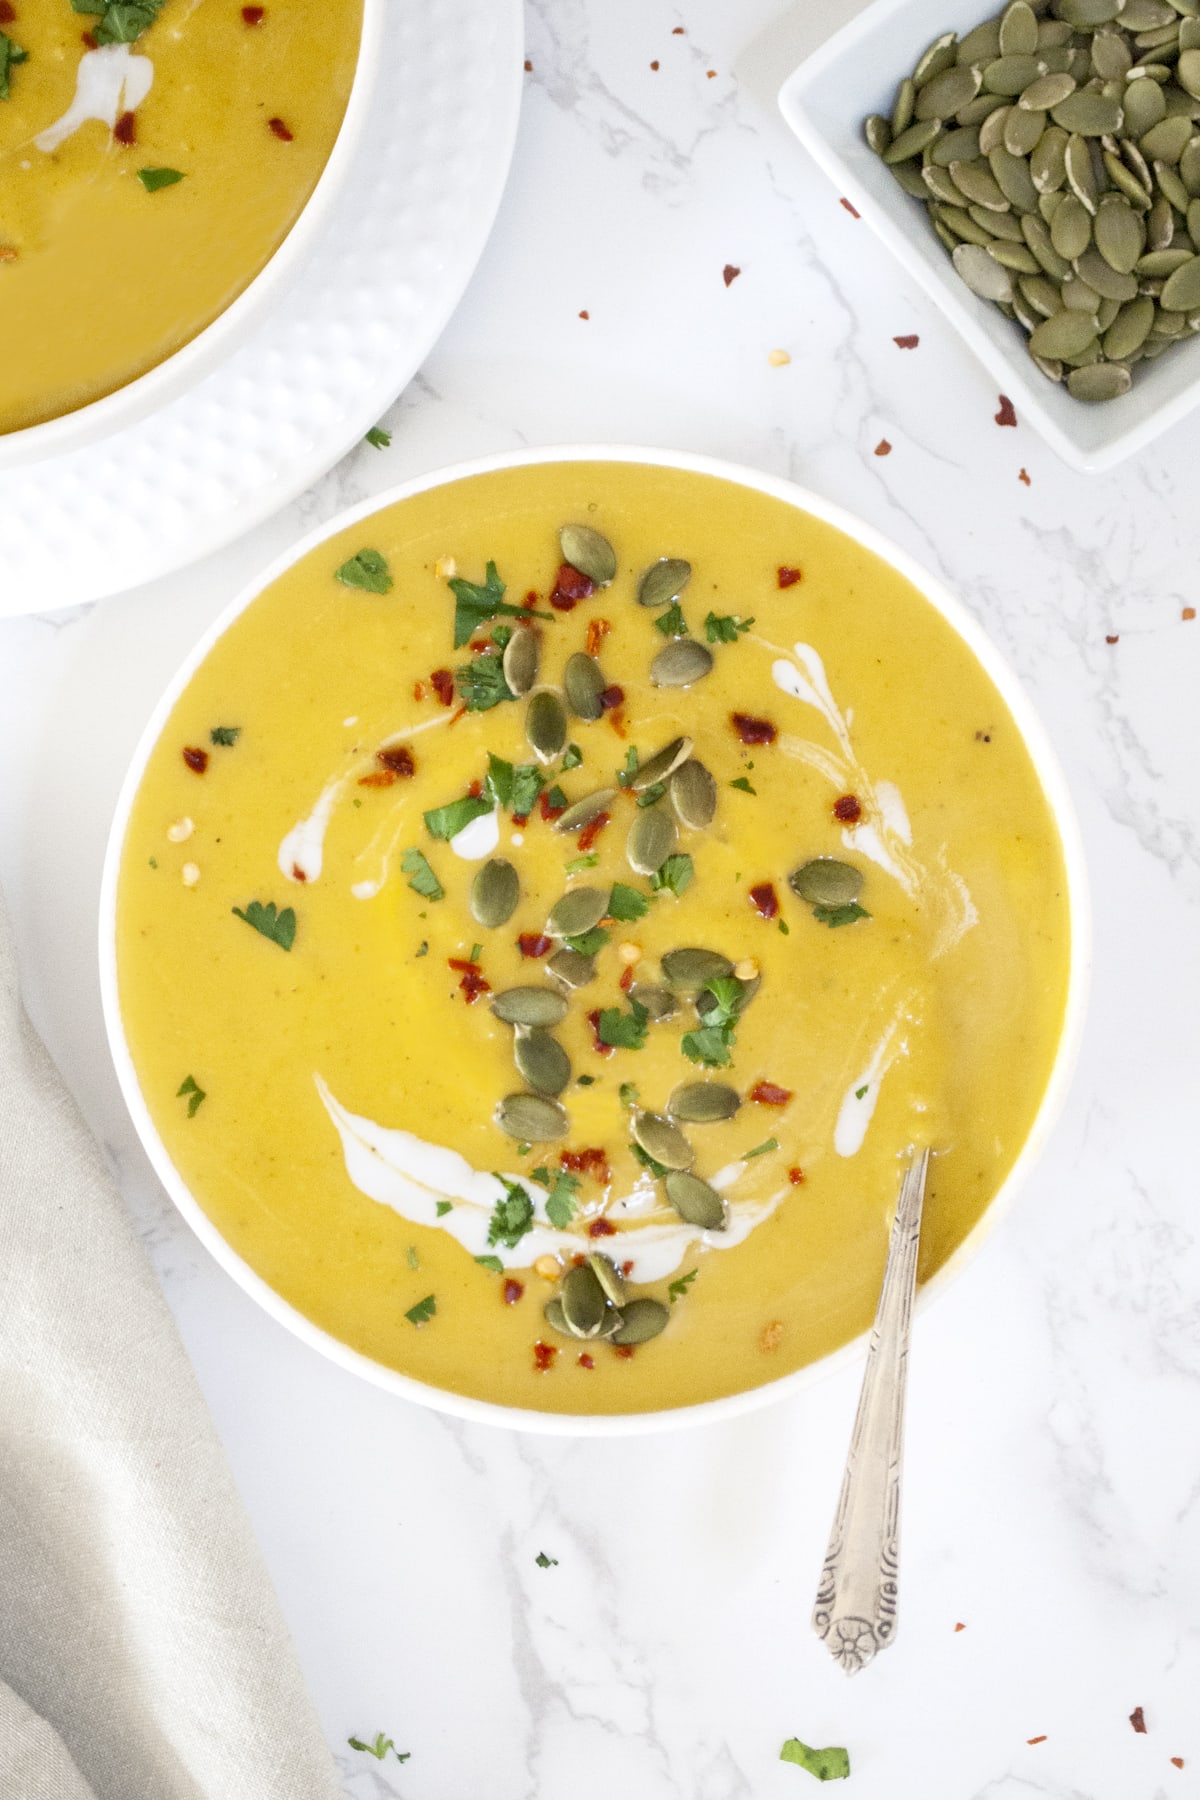 Creamy Vegan Curried Pumpkin Soup garnished with pumpkin seeds, cilantro and red chili flakes